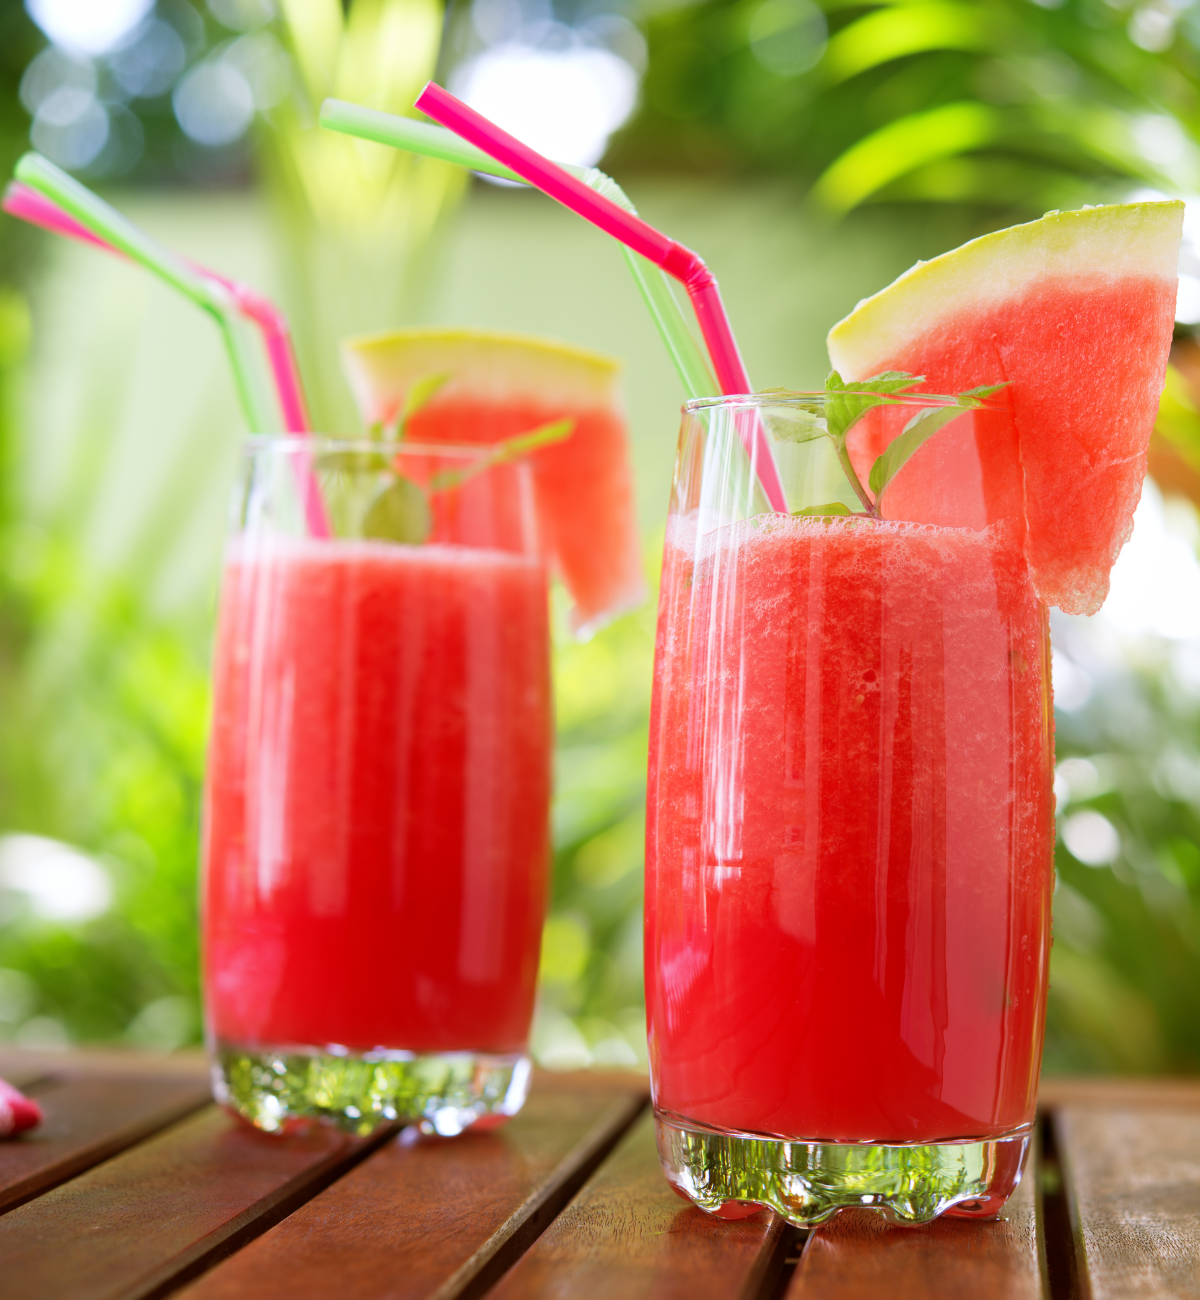 https://groupex.com/boost-profits-with-smoothies/